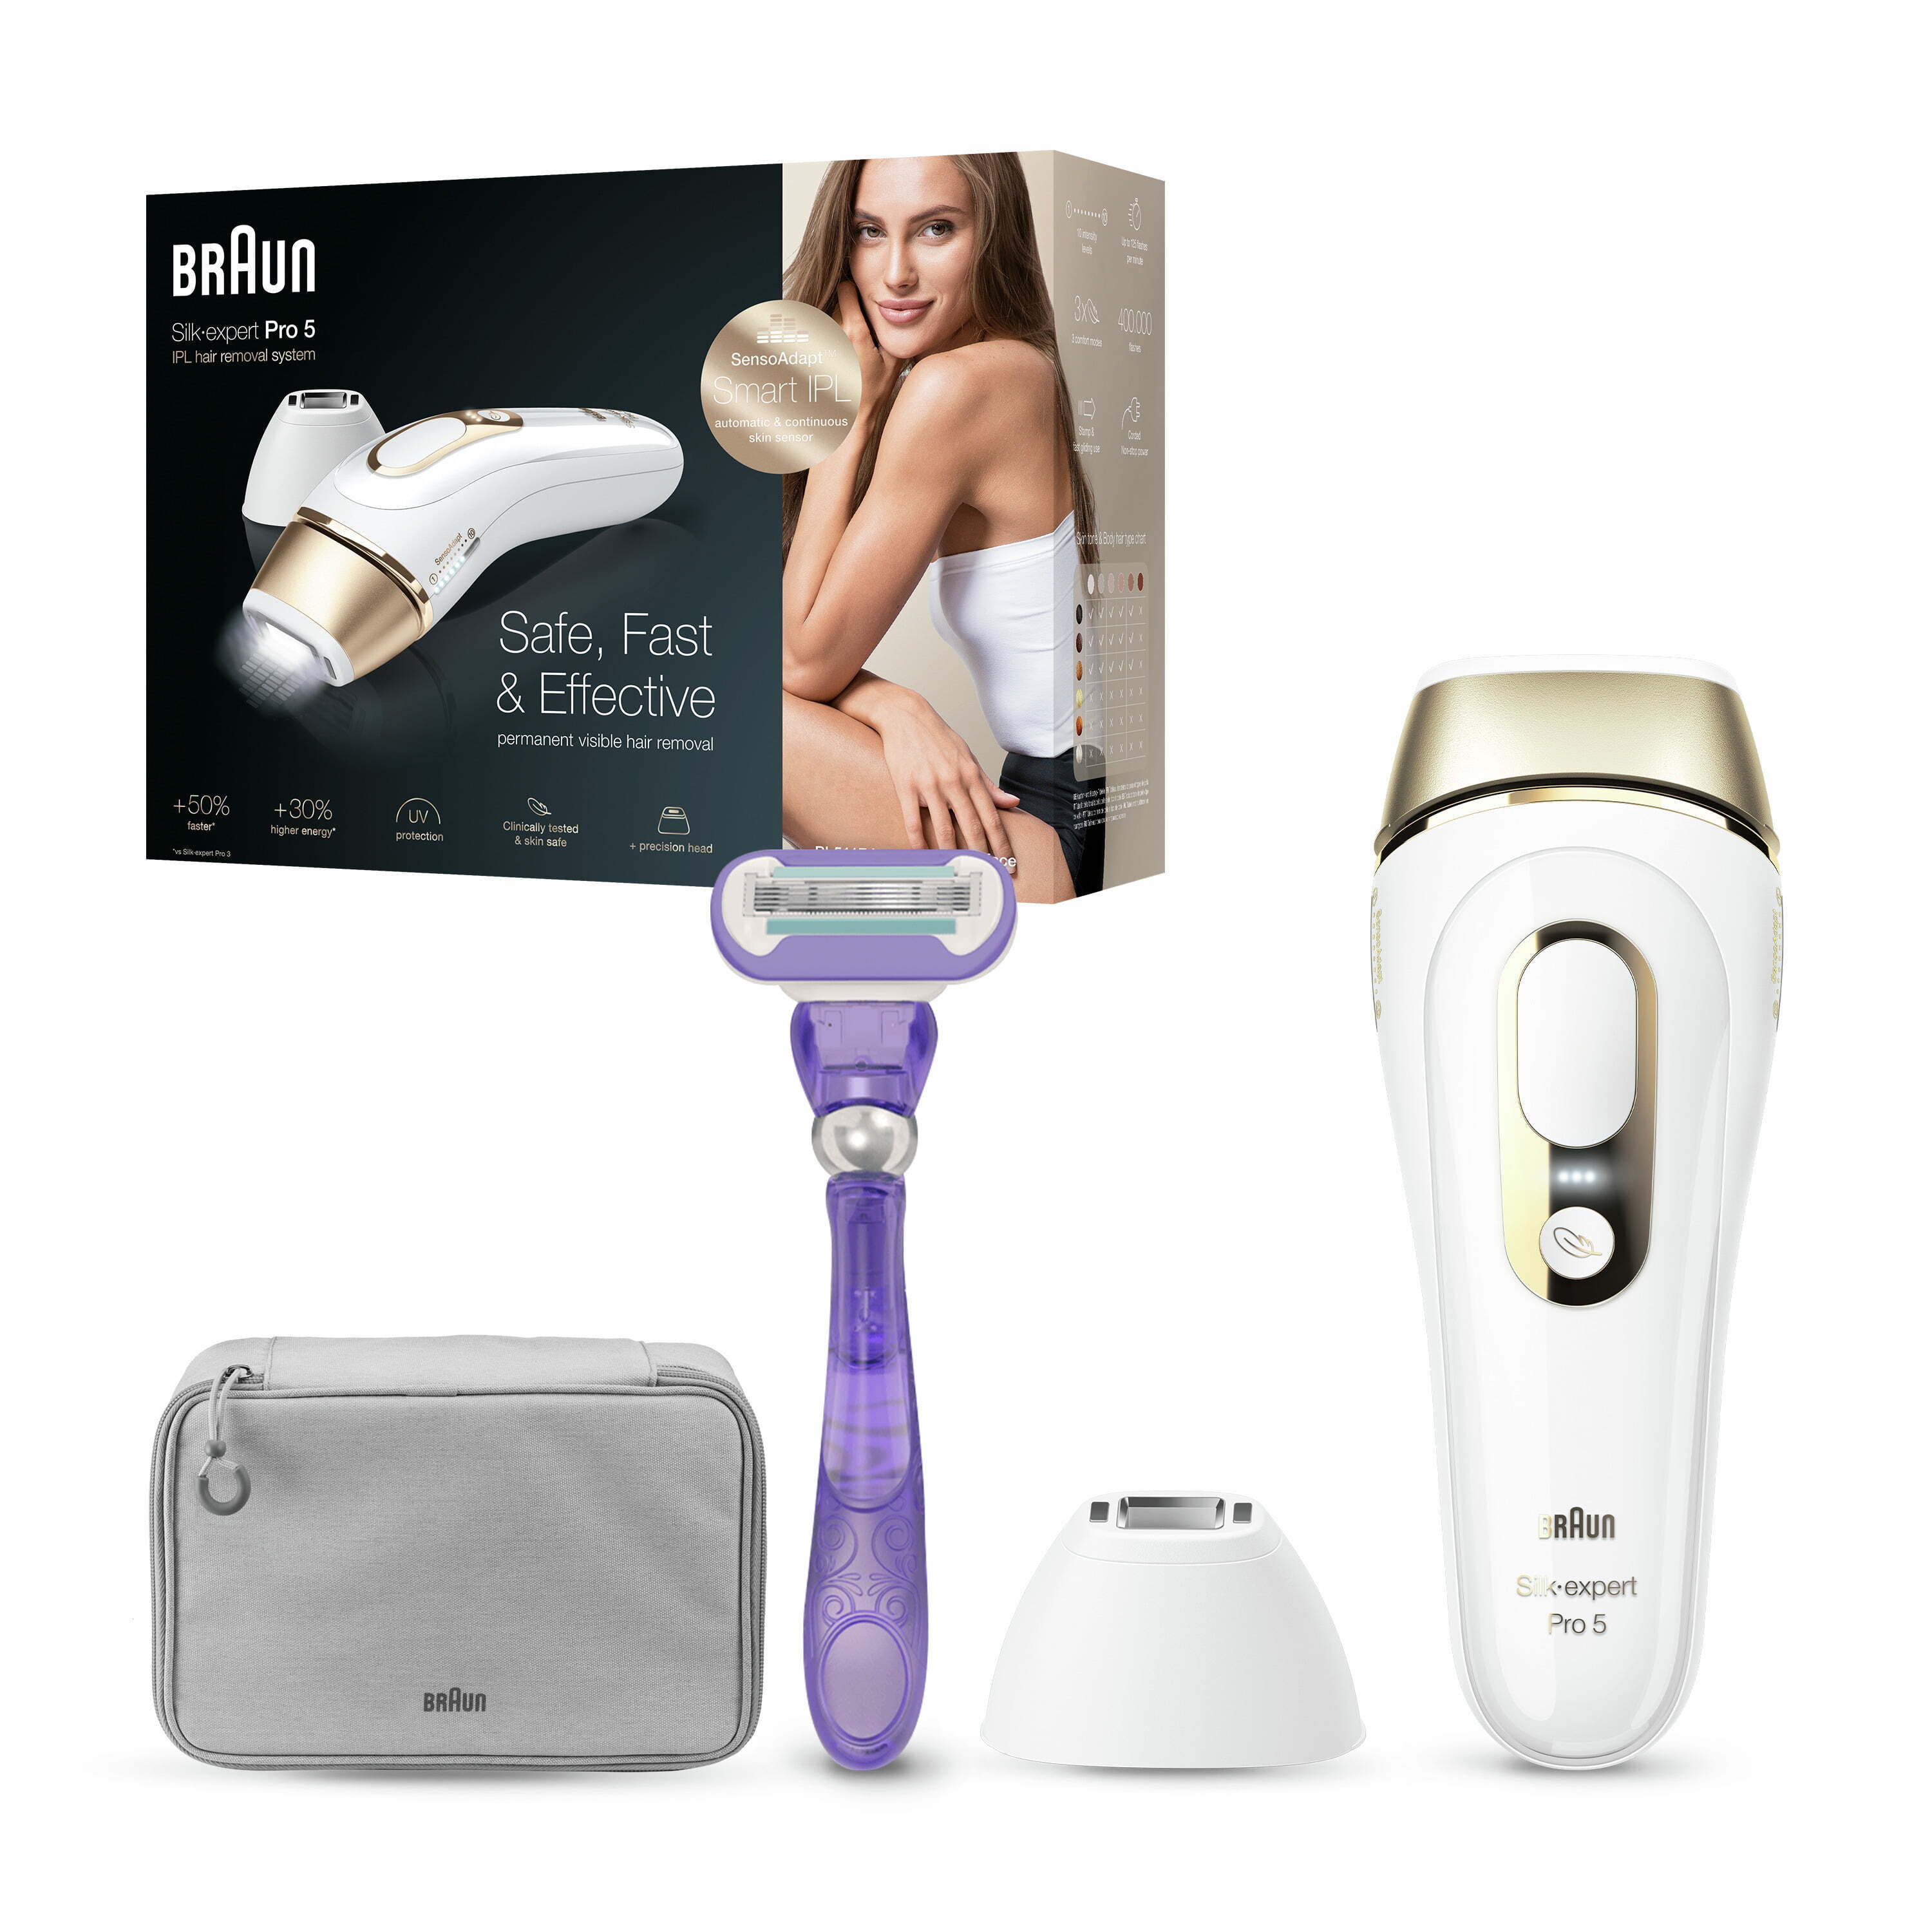 Buy Braun Silk-Expert Pro 5 IPL Hair Removal Kit PL5147 Multicolour Online  - Shop Beauty & Personal Care on Carrefour UAE